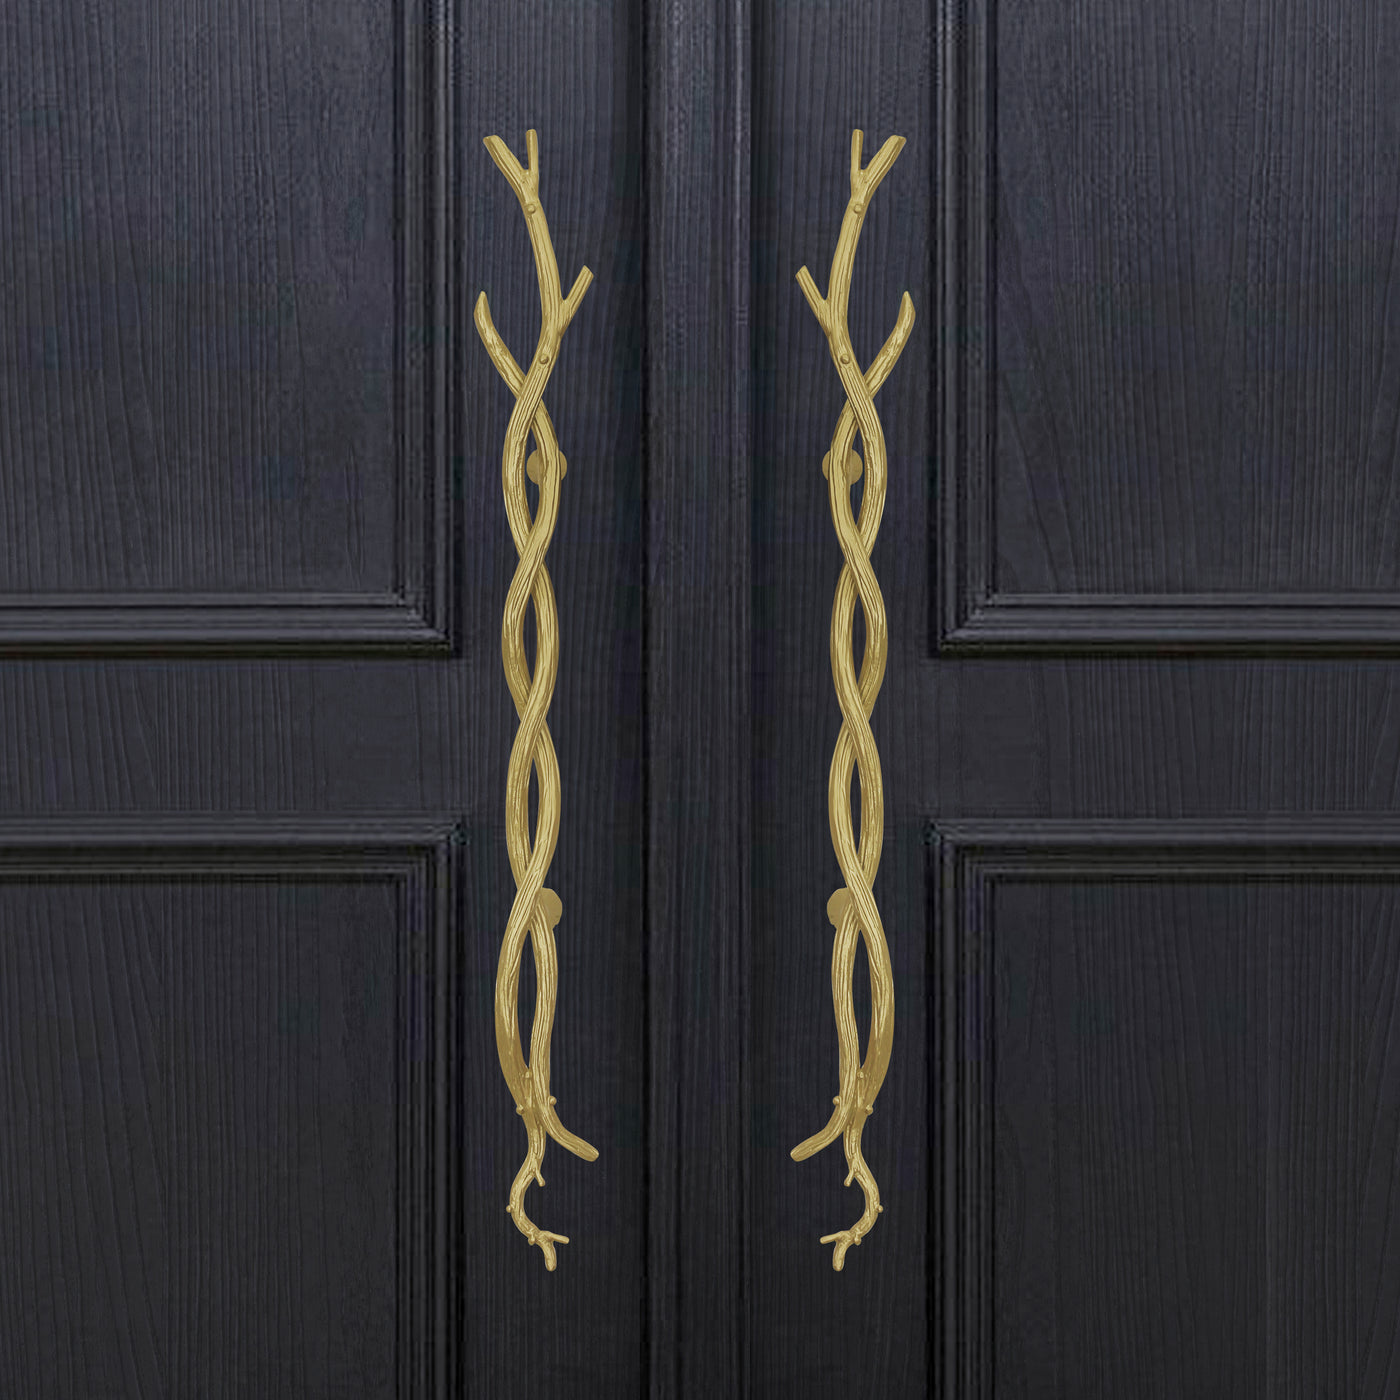 A pair of decorative golden pull handles inspired by twisted branches mounted on a closed wooden door